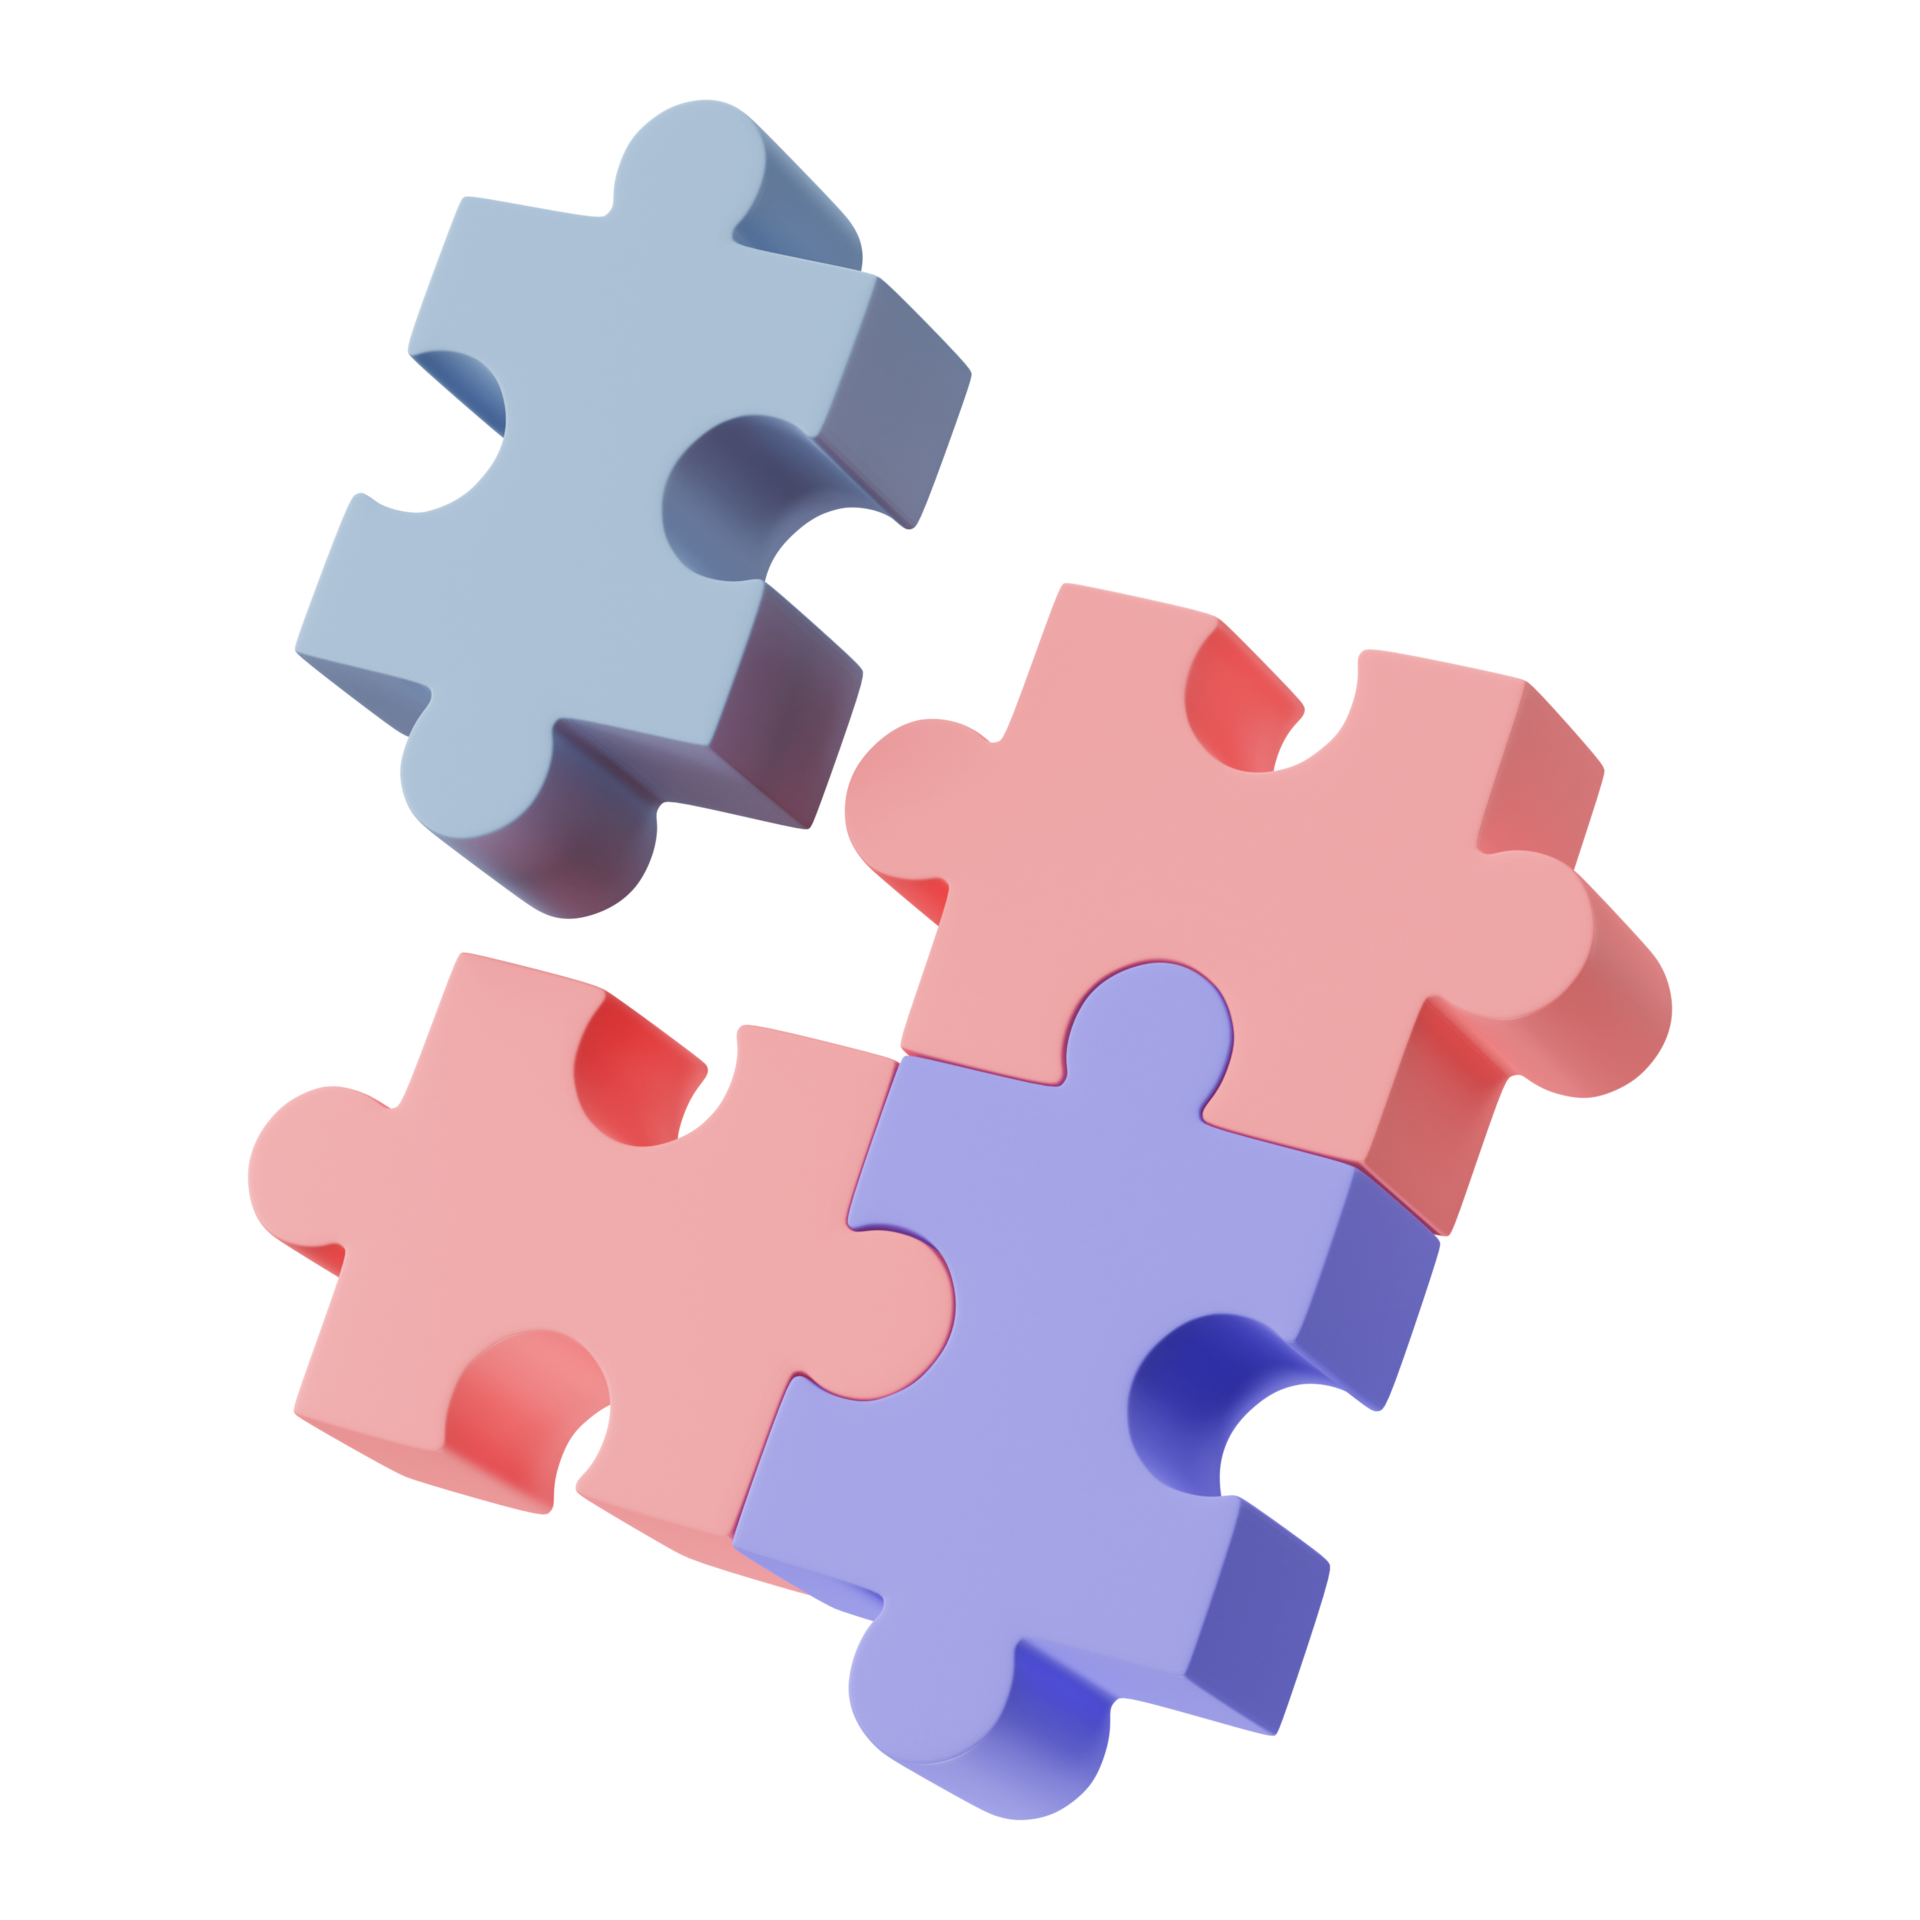 3D jigsaw puzzle pieces isolated on transparent background.  Problem-solving, business connecting, cooperation, partnership concept.  22610900 PNG